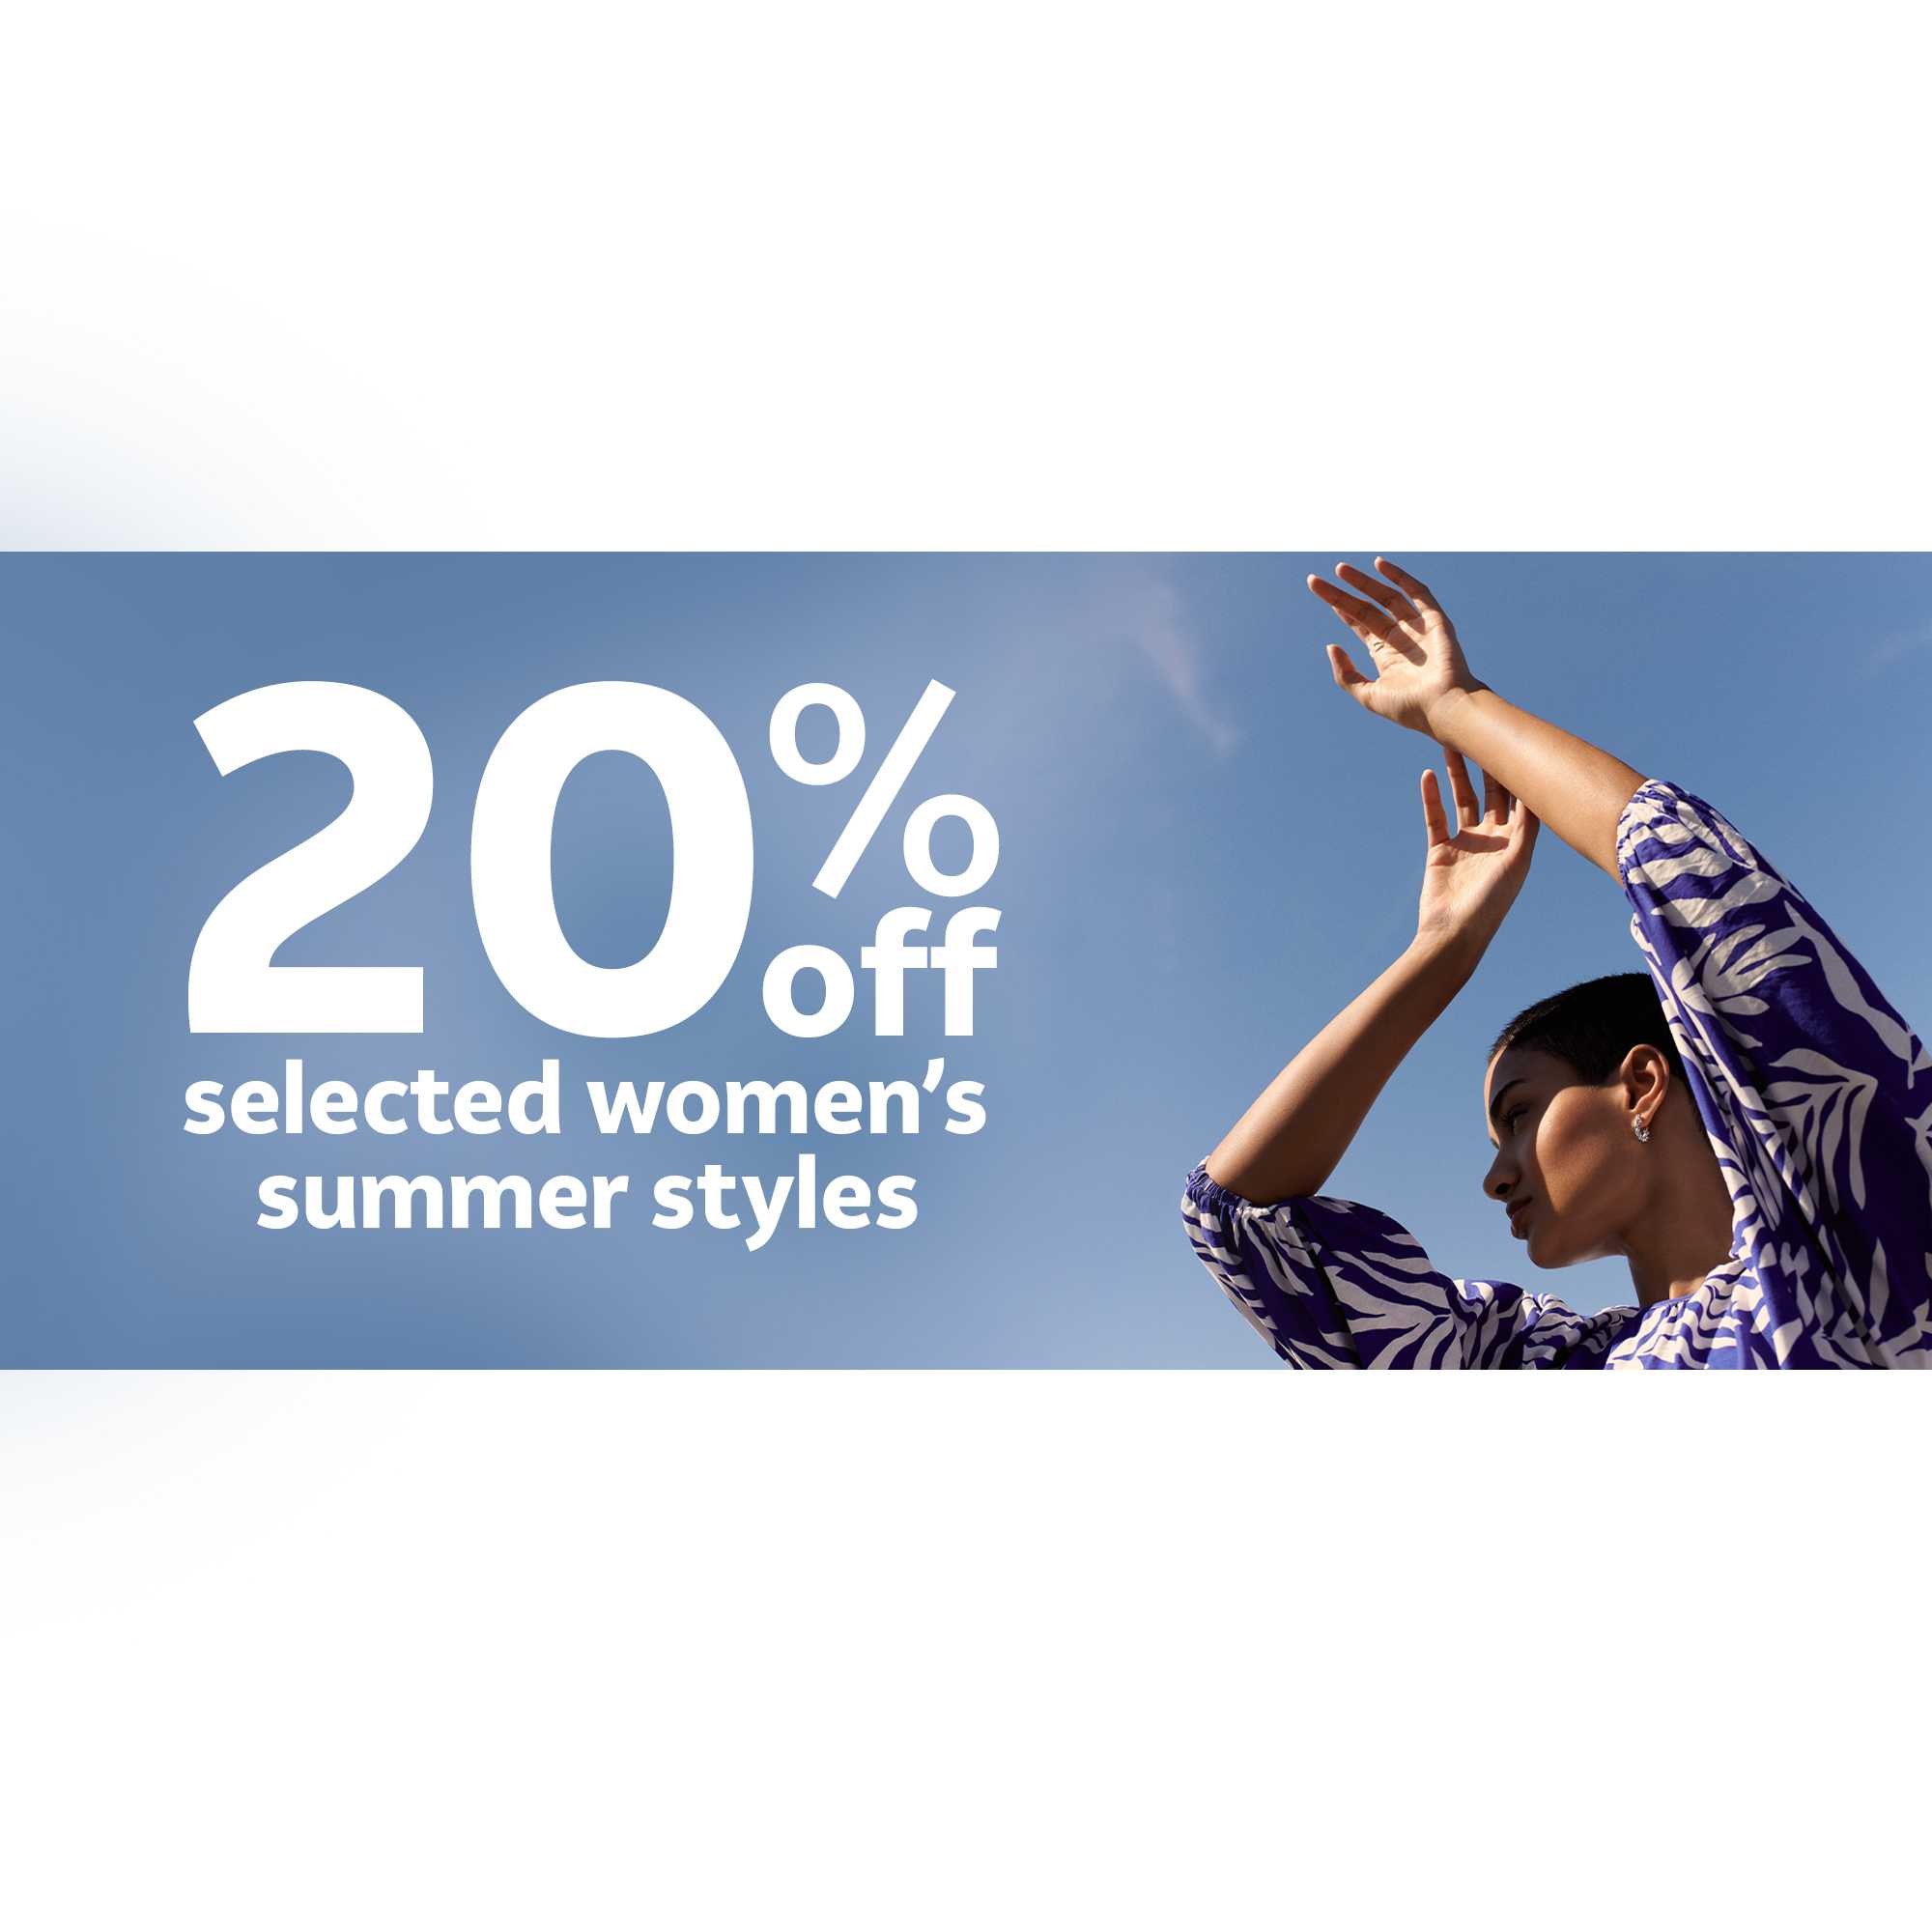 20% off selected women's summer styles.